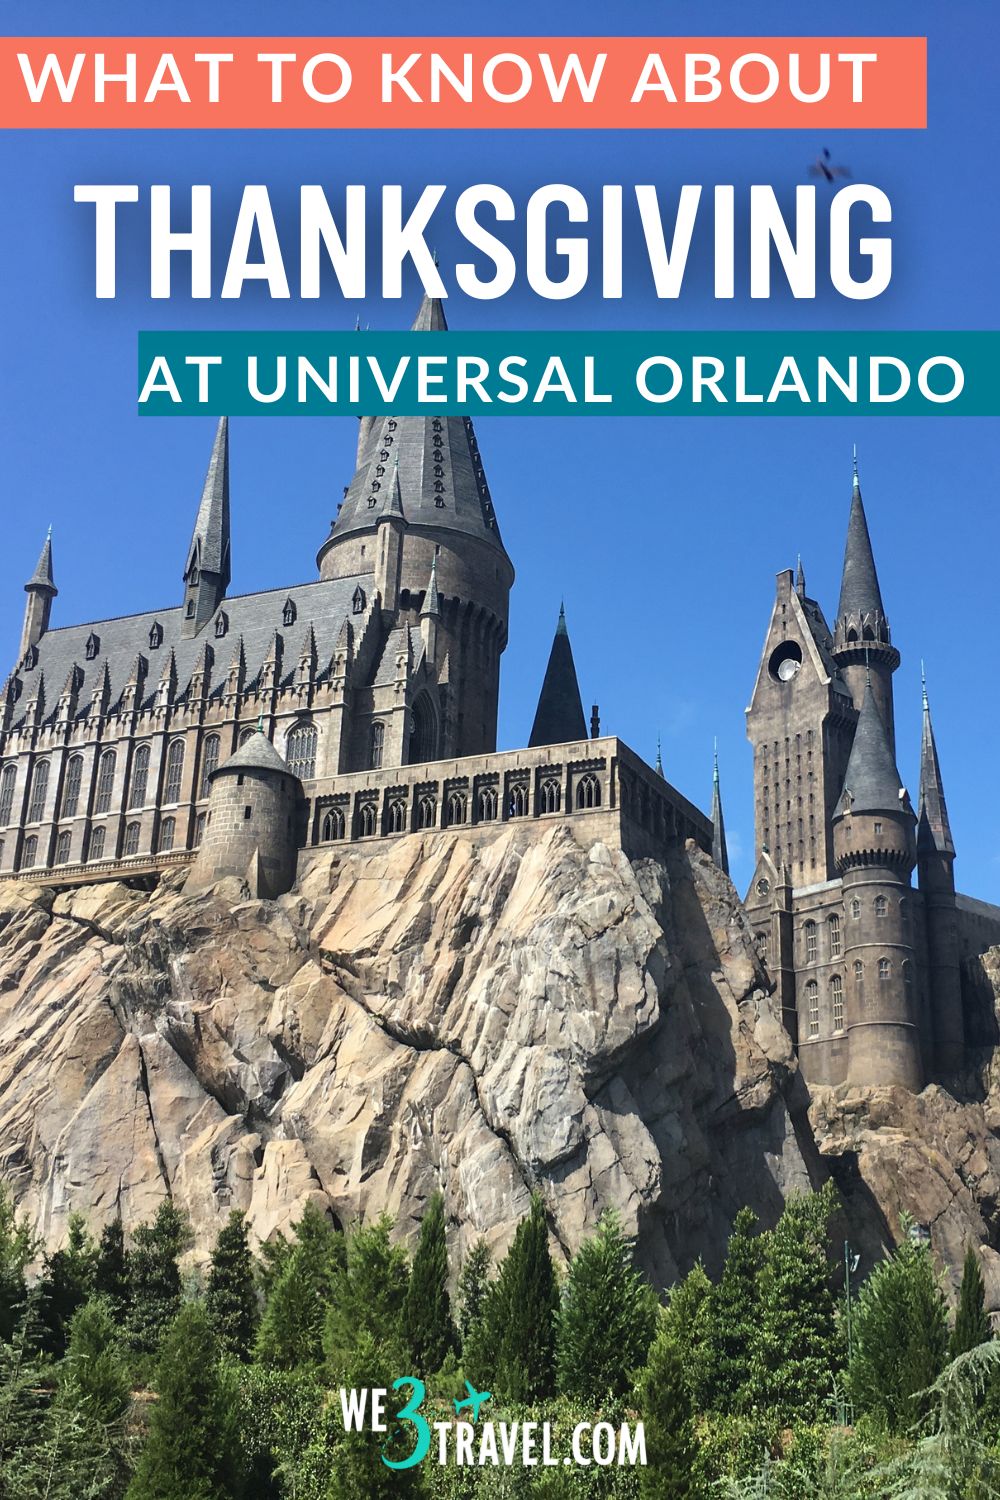 What to know about Thanksgiving at Universal Orlando